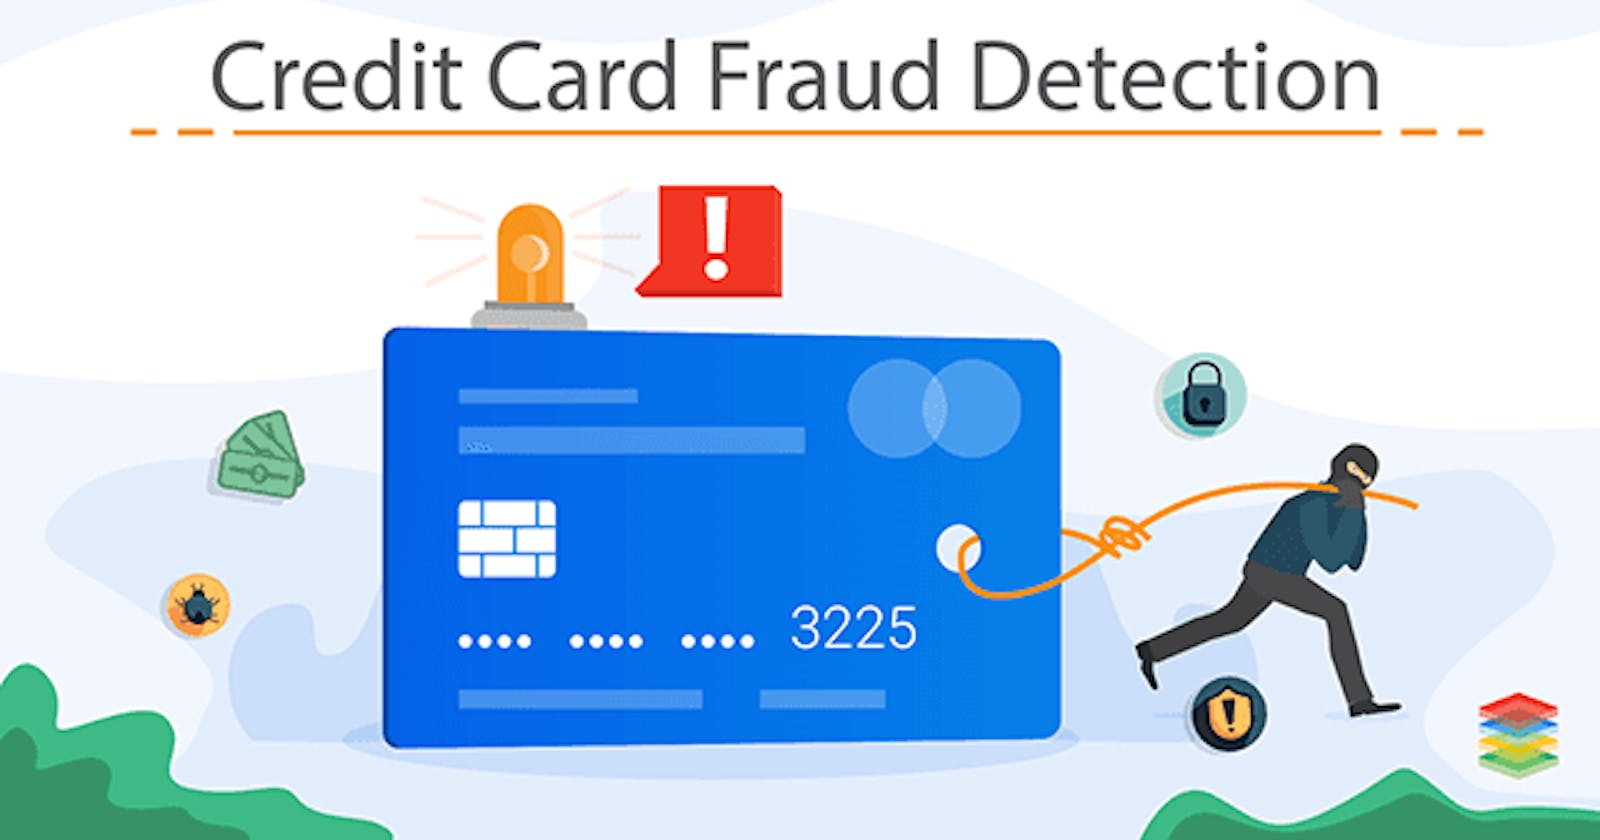 Credit Card Fraud Detection Using Machine Learning With Python And TensorFlow